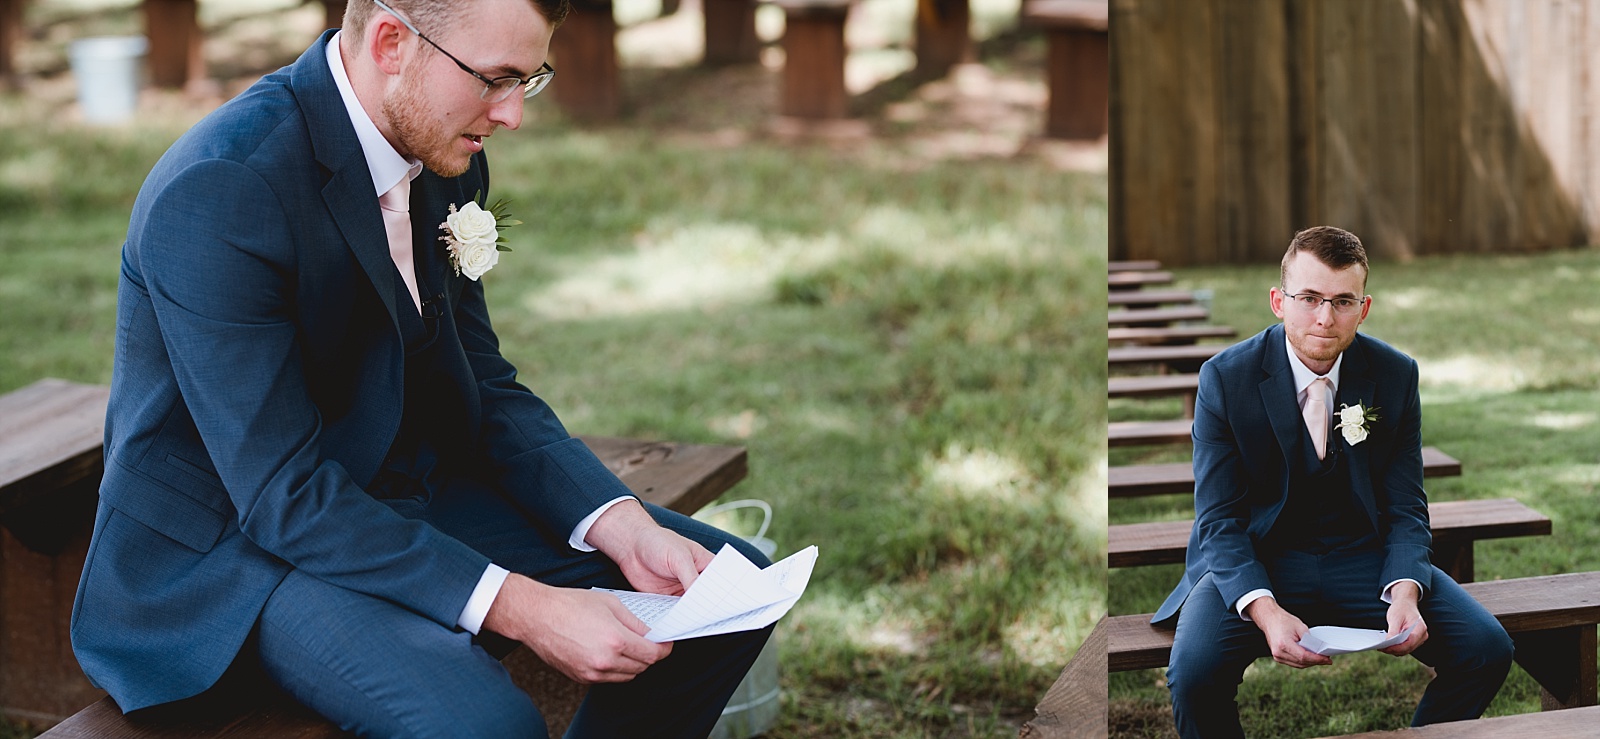 Groom reading a letter from his bride prior to the wedding ceremony.